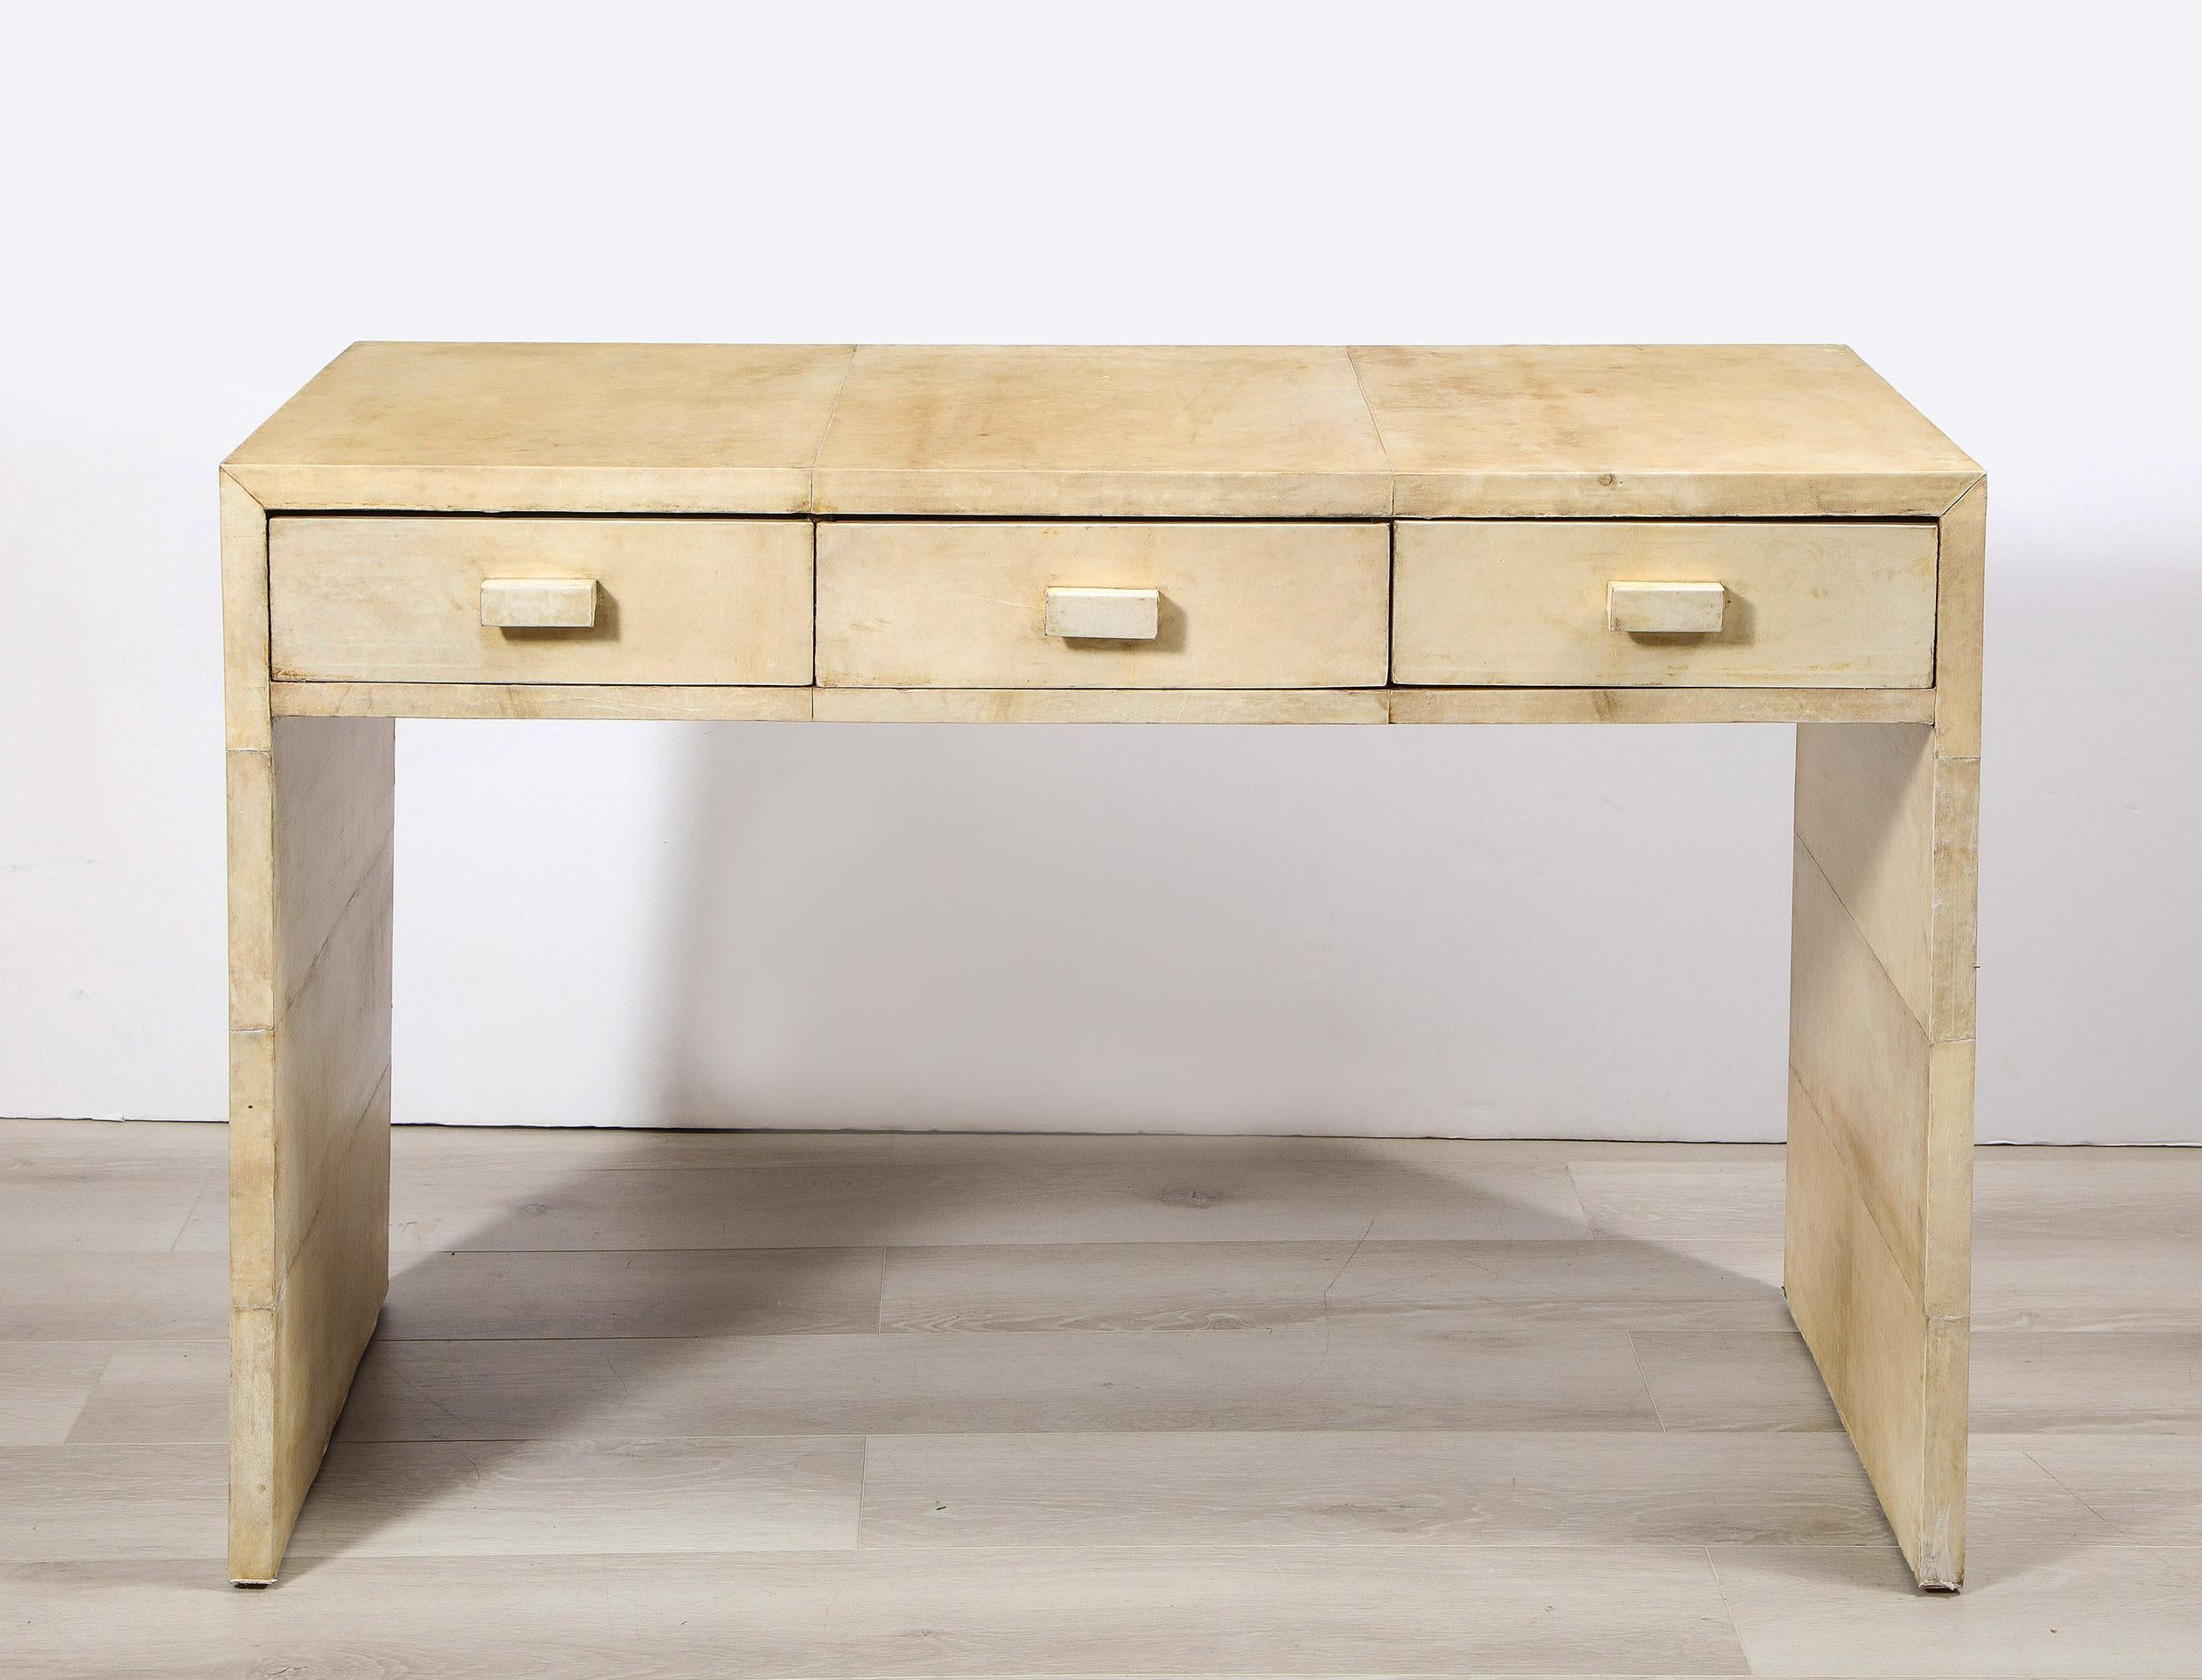 French parchment covered desk, in the manner of Jean-Michel Frank

The rectangular form all-over parchment covered desk with three drawers.